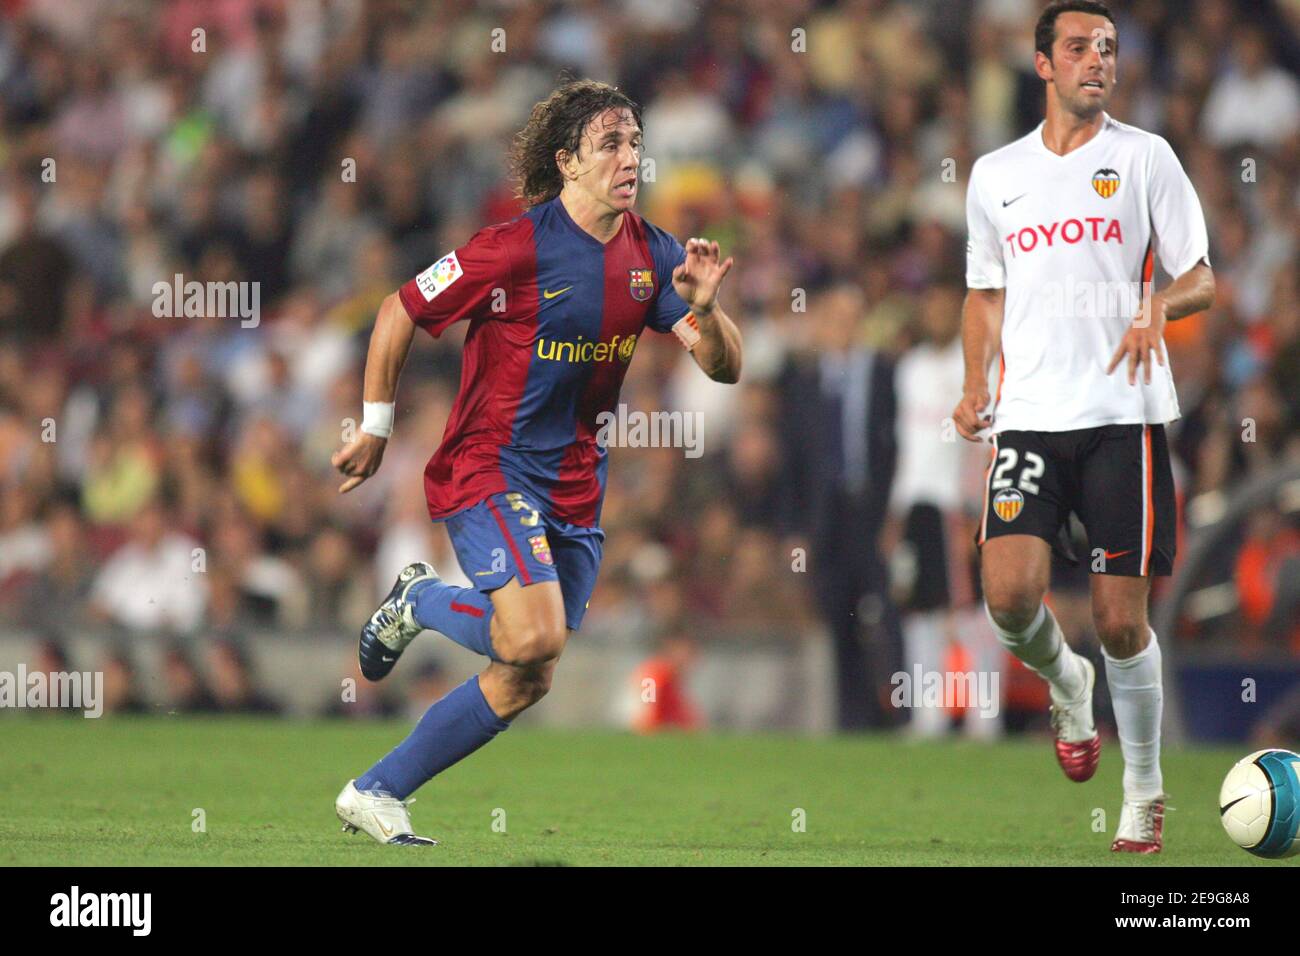 Barcelona's Carles Puyol during the Spanish primera league, FC Barcelona vs Valencia CF, at the Nou Camp Stadium, in Barcelona, Spain, on September 24, 2006. The game ended in a draw 1-1. Photo by Manuel Blondeau/Cameleon/ABACAPRESS.COM Stock Photo